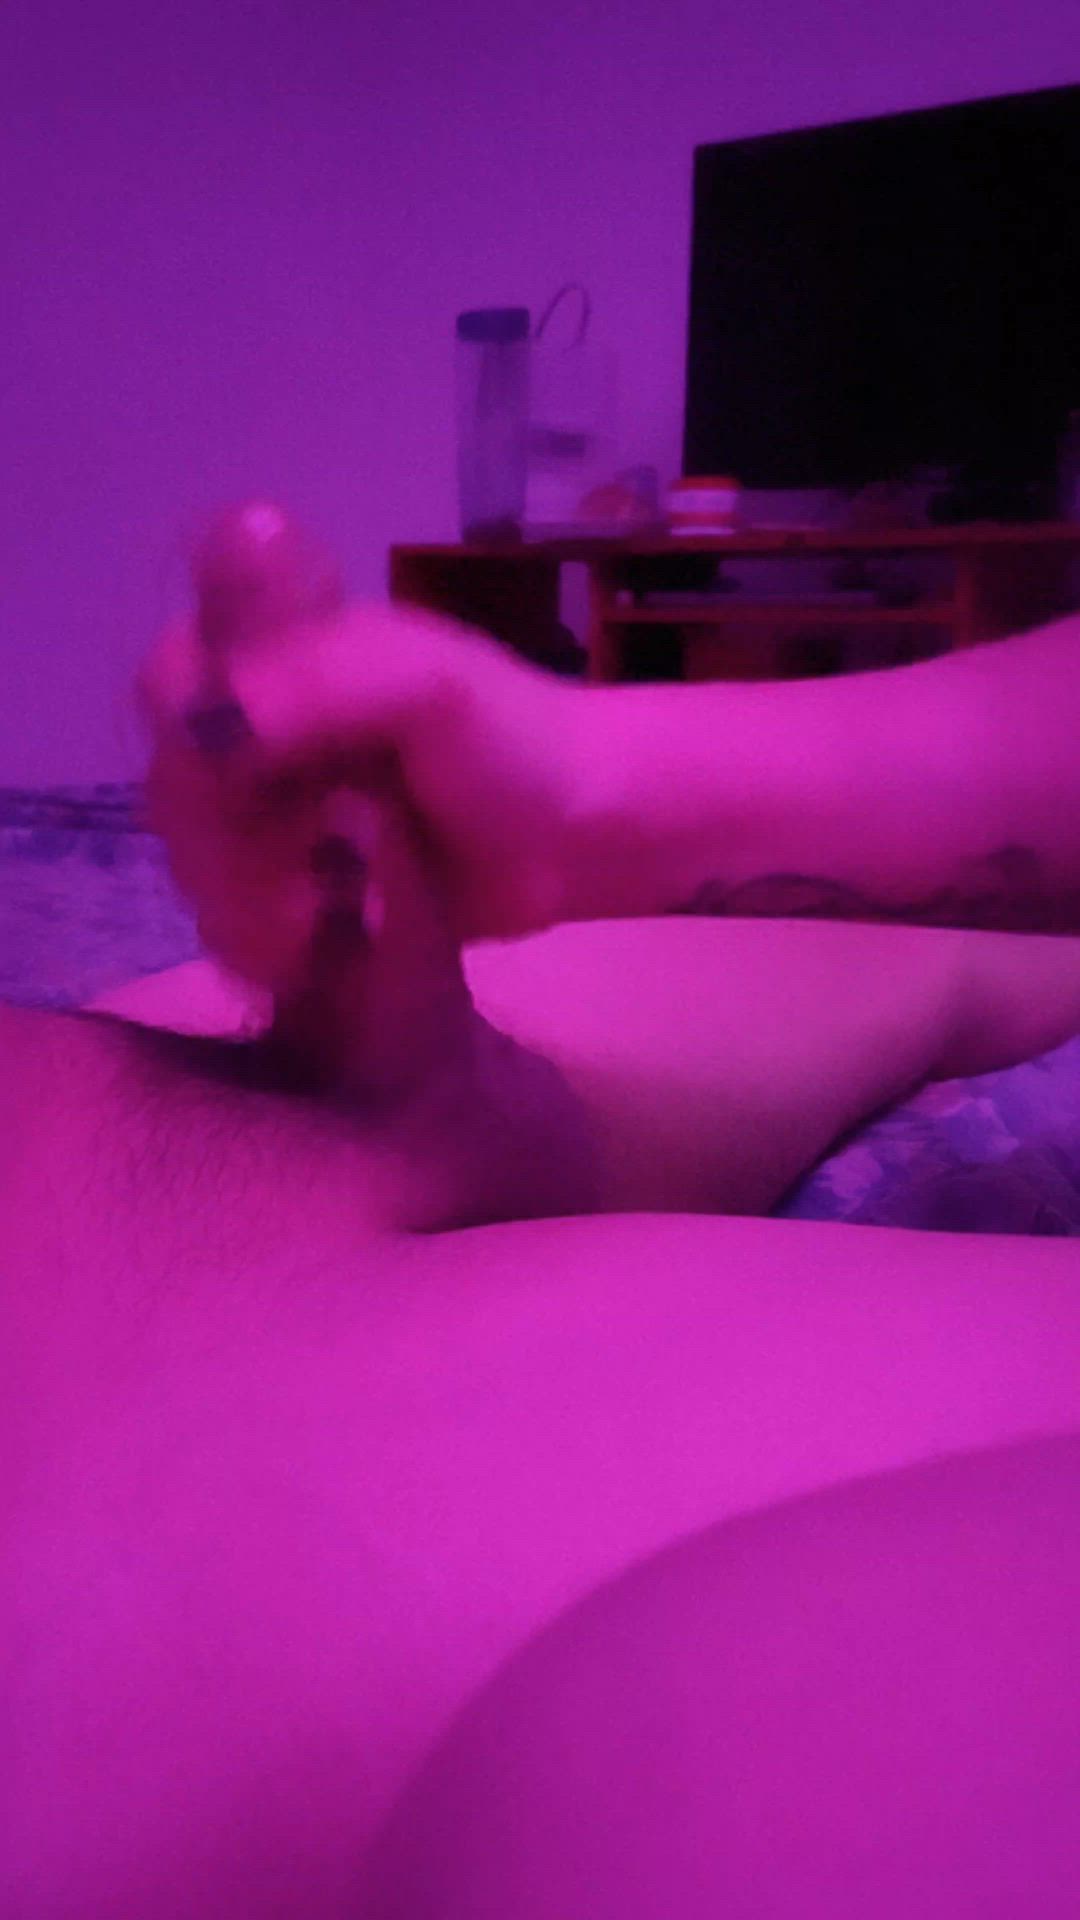 Amateur porn video with onlyfans model florybenja420 <strong>@florybenja420</strong>